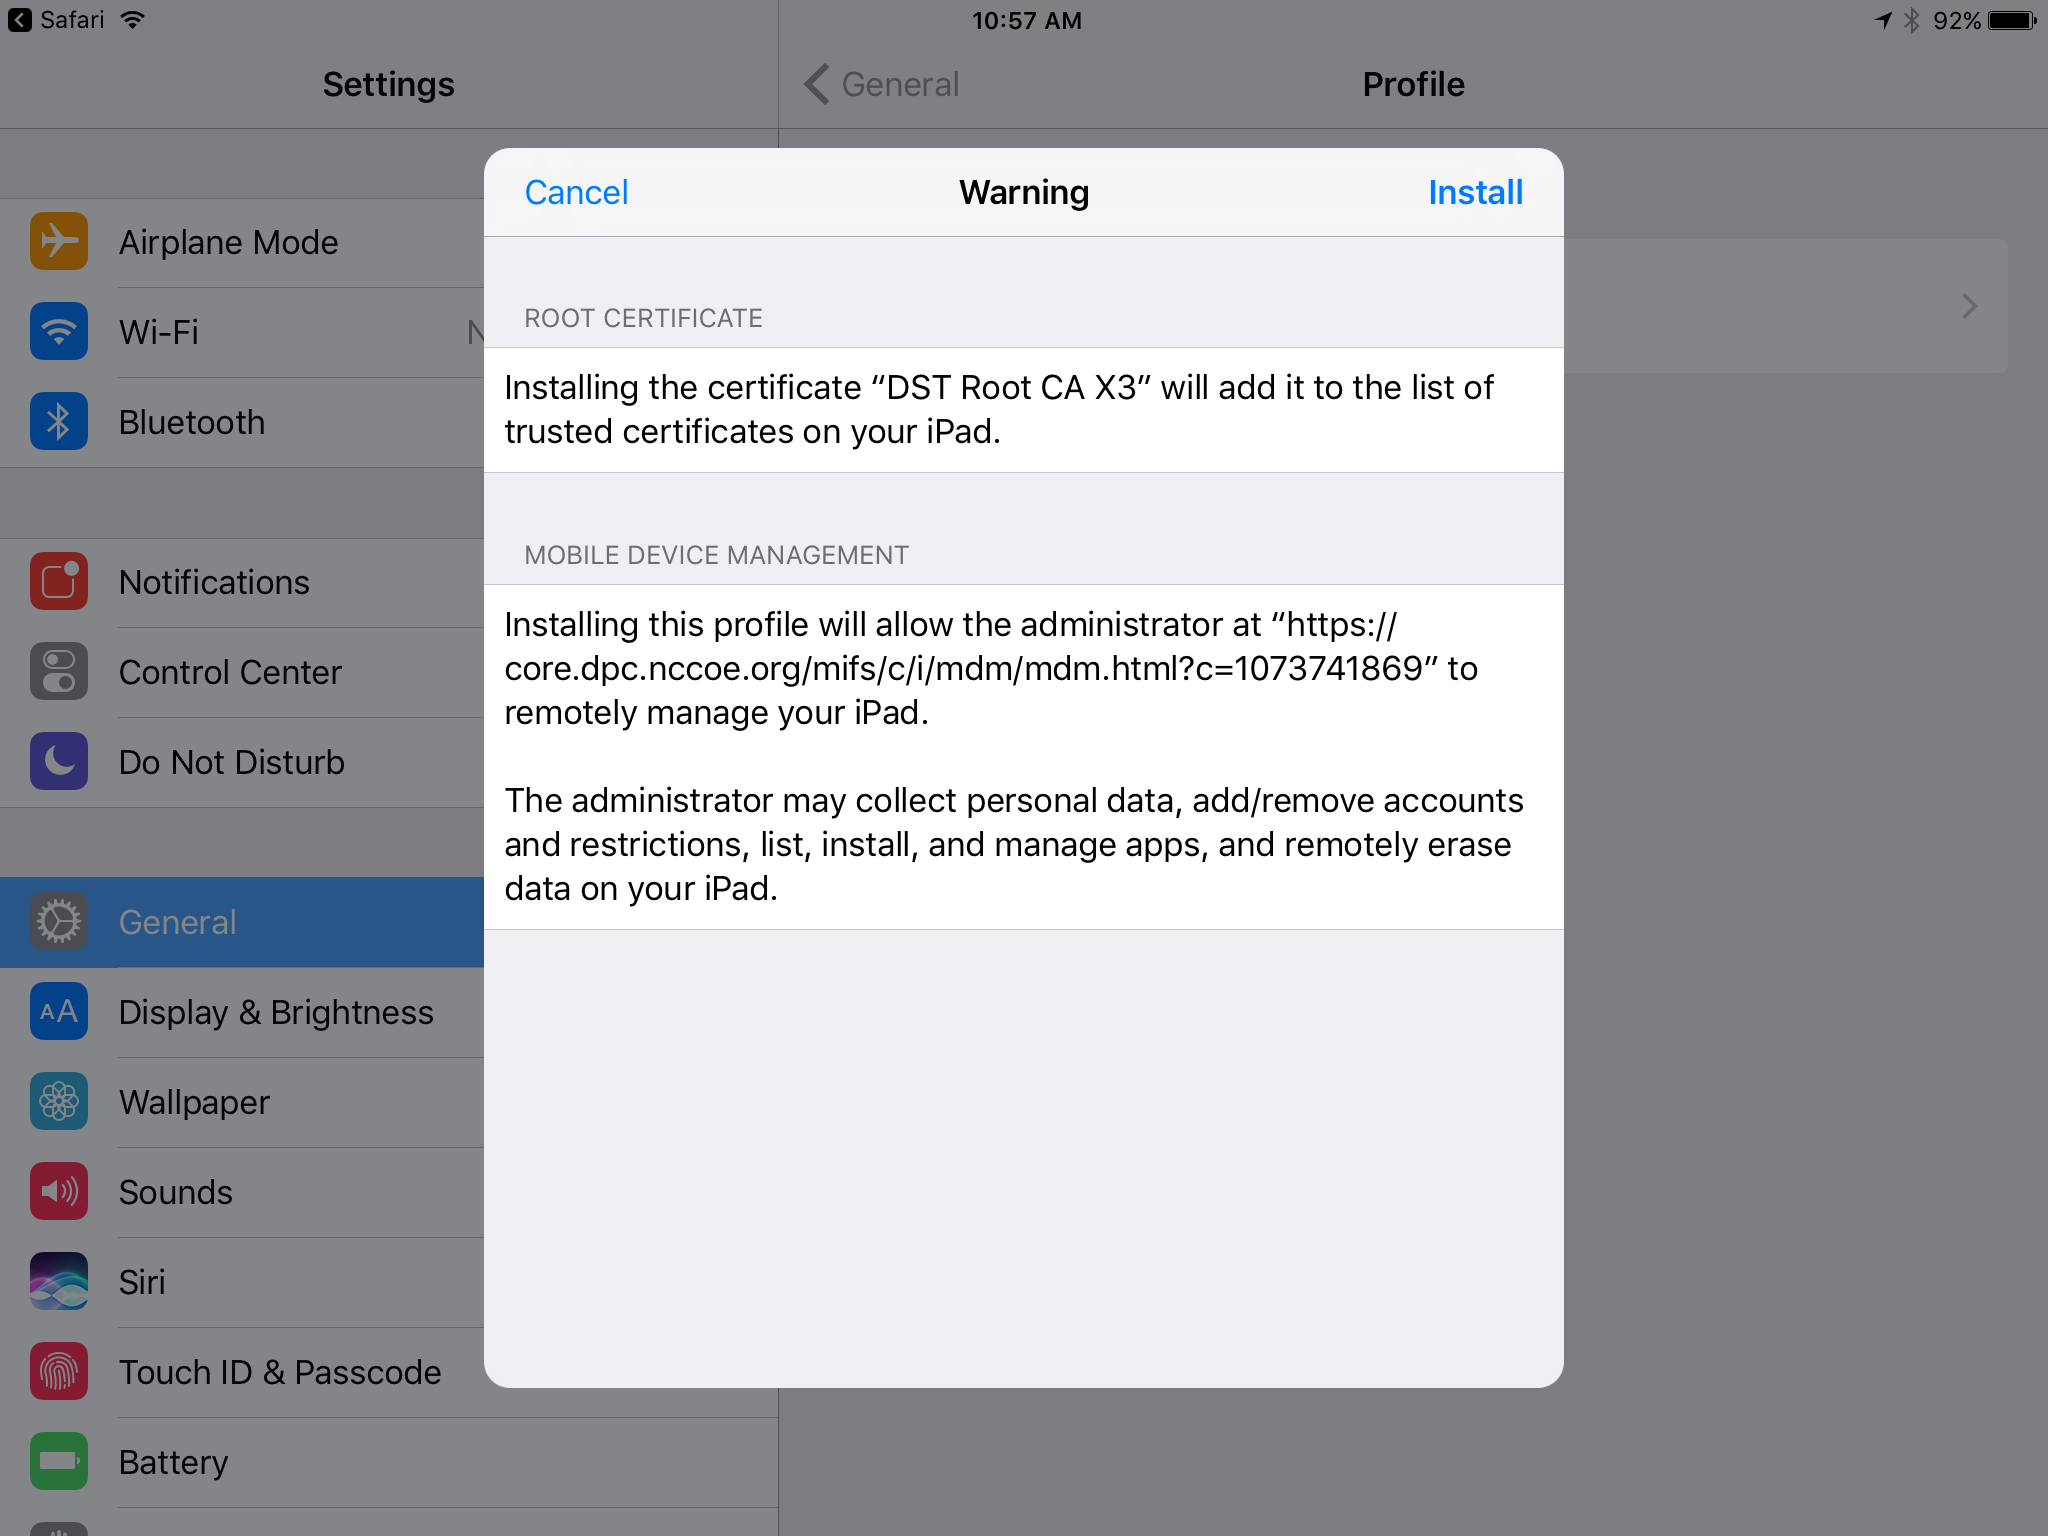 Settings app warns the user that installing the MobileIron profile includes a Root Certificate and Mobile Device Management and summarizes potential hazards to the user.